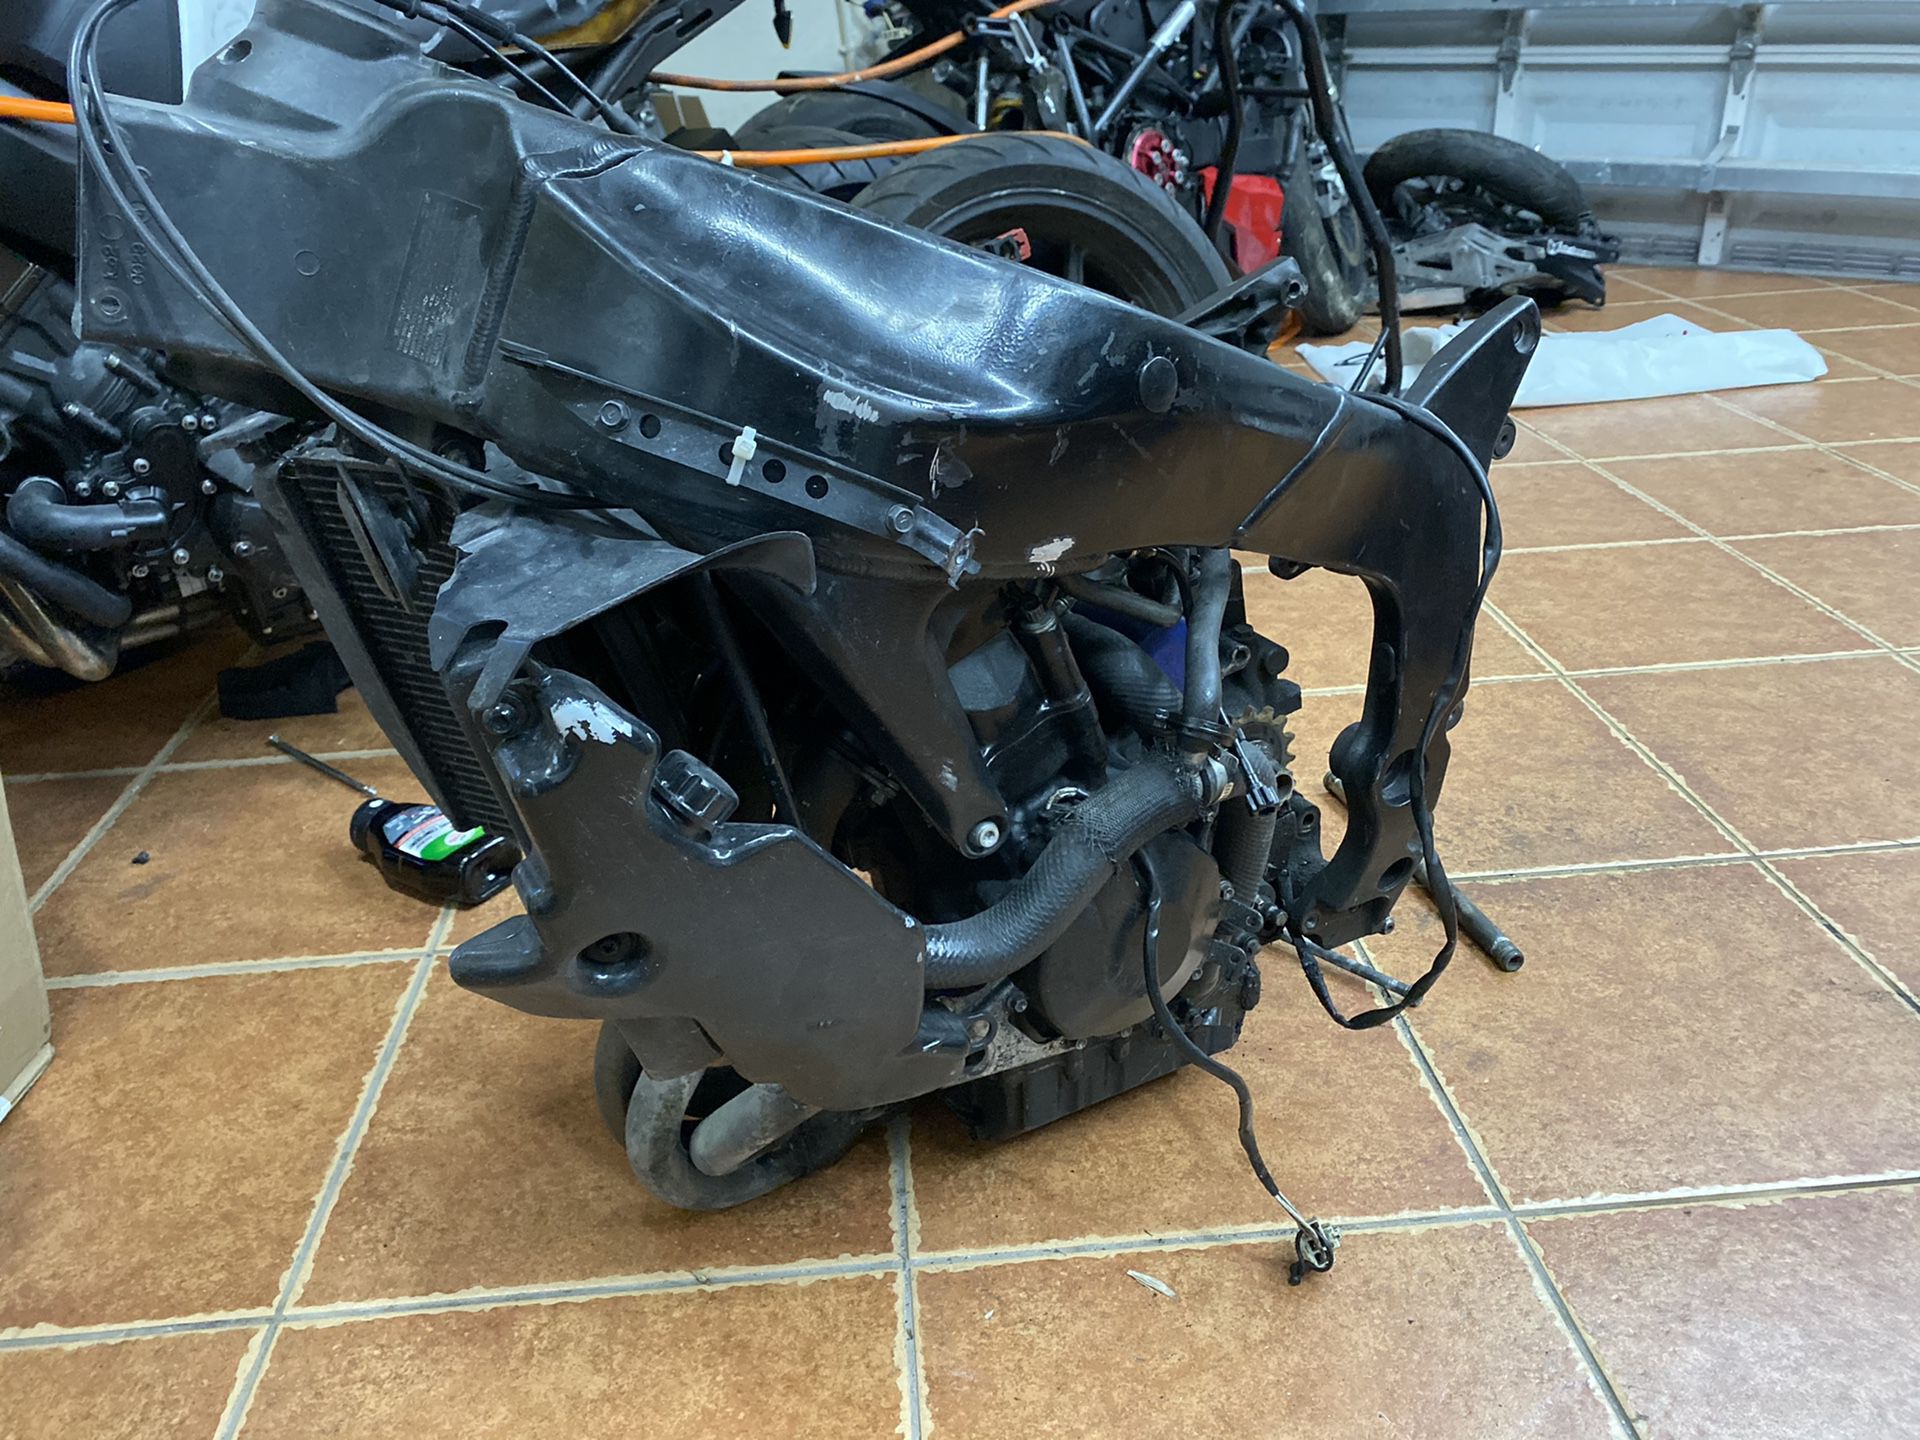 07 zx6r motor and frame